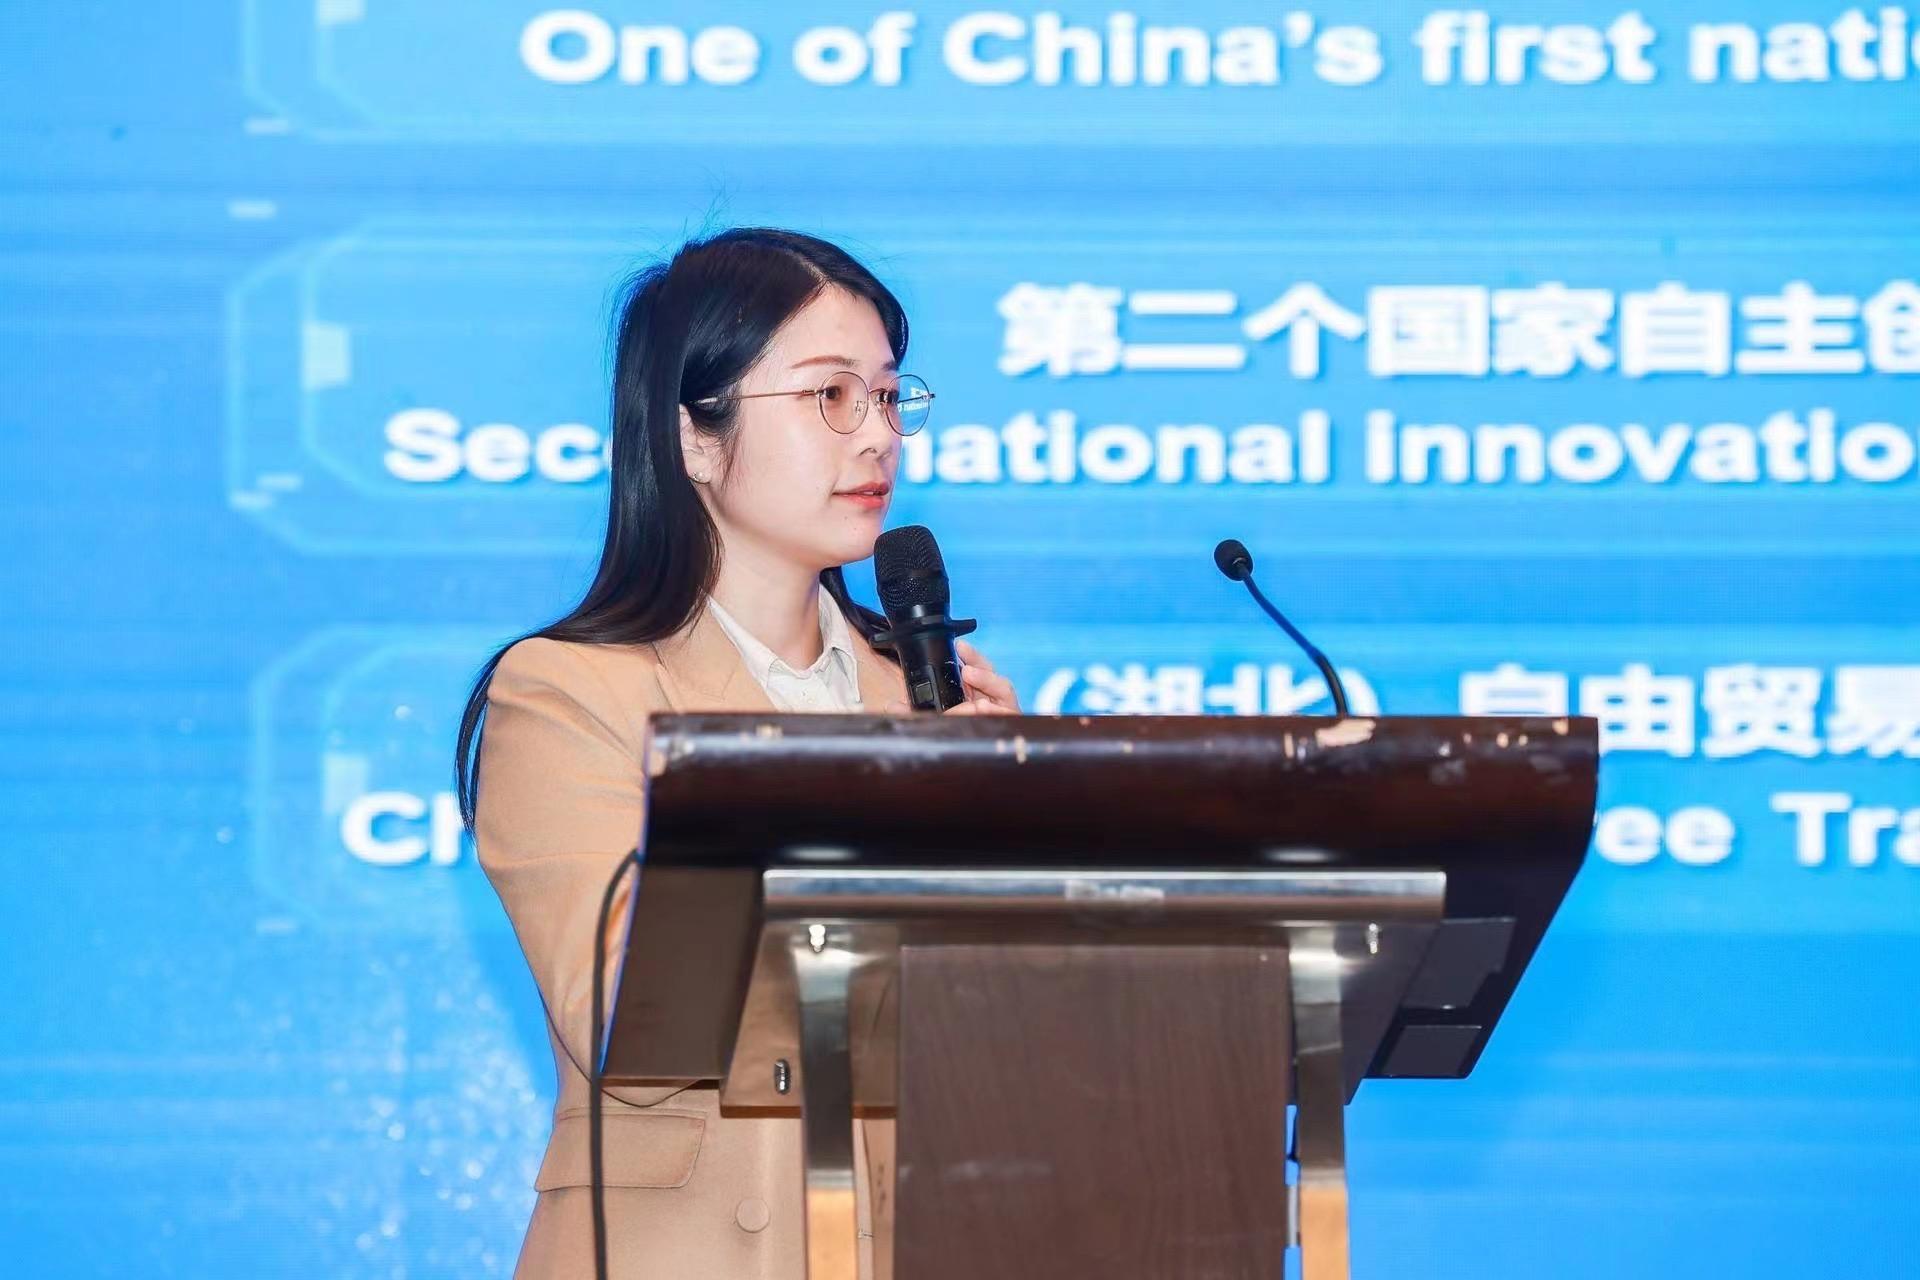 Invest Hong Kong and the Administrative Committee of Wuhan East Lake High-Tech Development Zone (WEHDZ) co-hosted a seminar in Wuhan, Hubei Province, today (March 21), encouraging local high-tech enterprises to make full use of Hong Kong's business advantages and opportunities in innovation development amid the Belt and Road Initiative and the Guangdong-Hong Kong-Macao Greater Bay Area development to expand overseas. Photo shows the Deputy Director of the Bureau of investment promotion of the WEHDZ, Ms Chen Yu, presenting at the seminar. 


